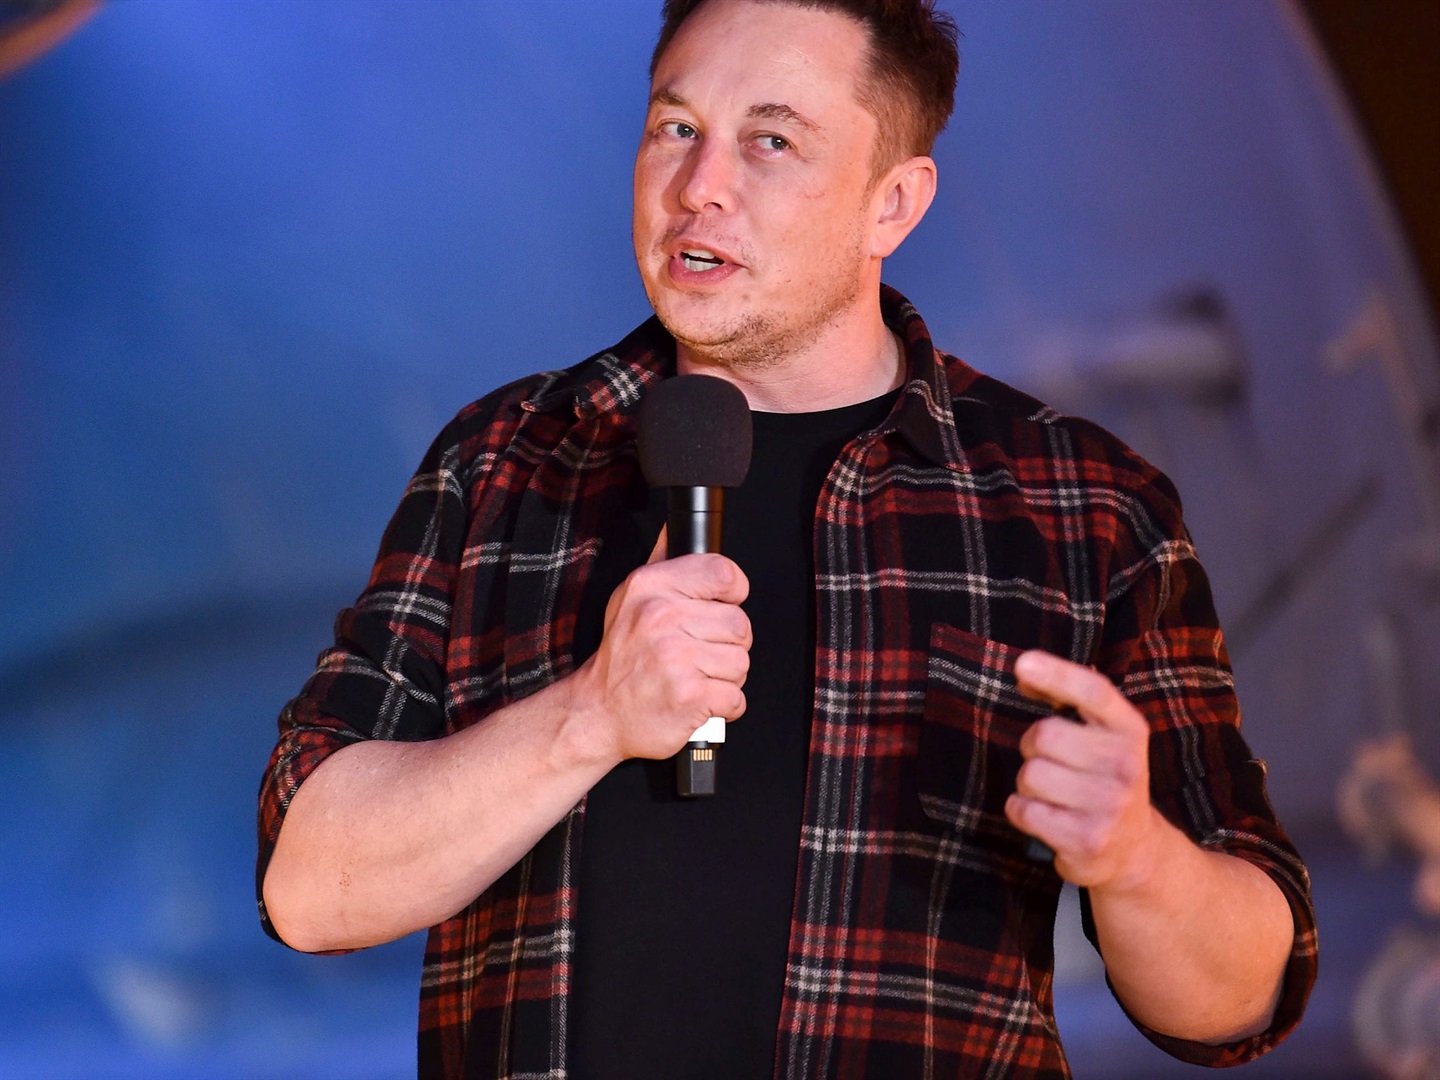 Elon Musk told advertisers he wants tiers of content moderation like movie age ratings, report says